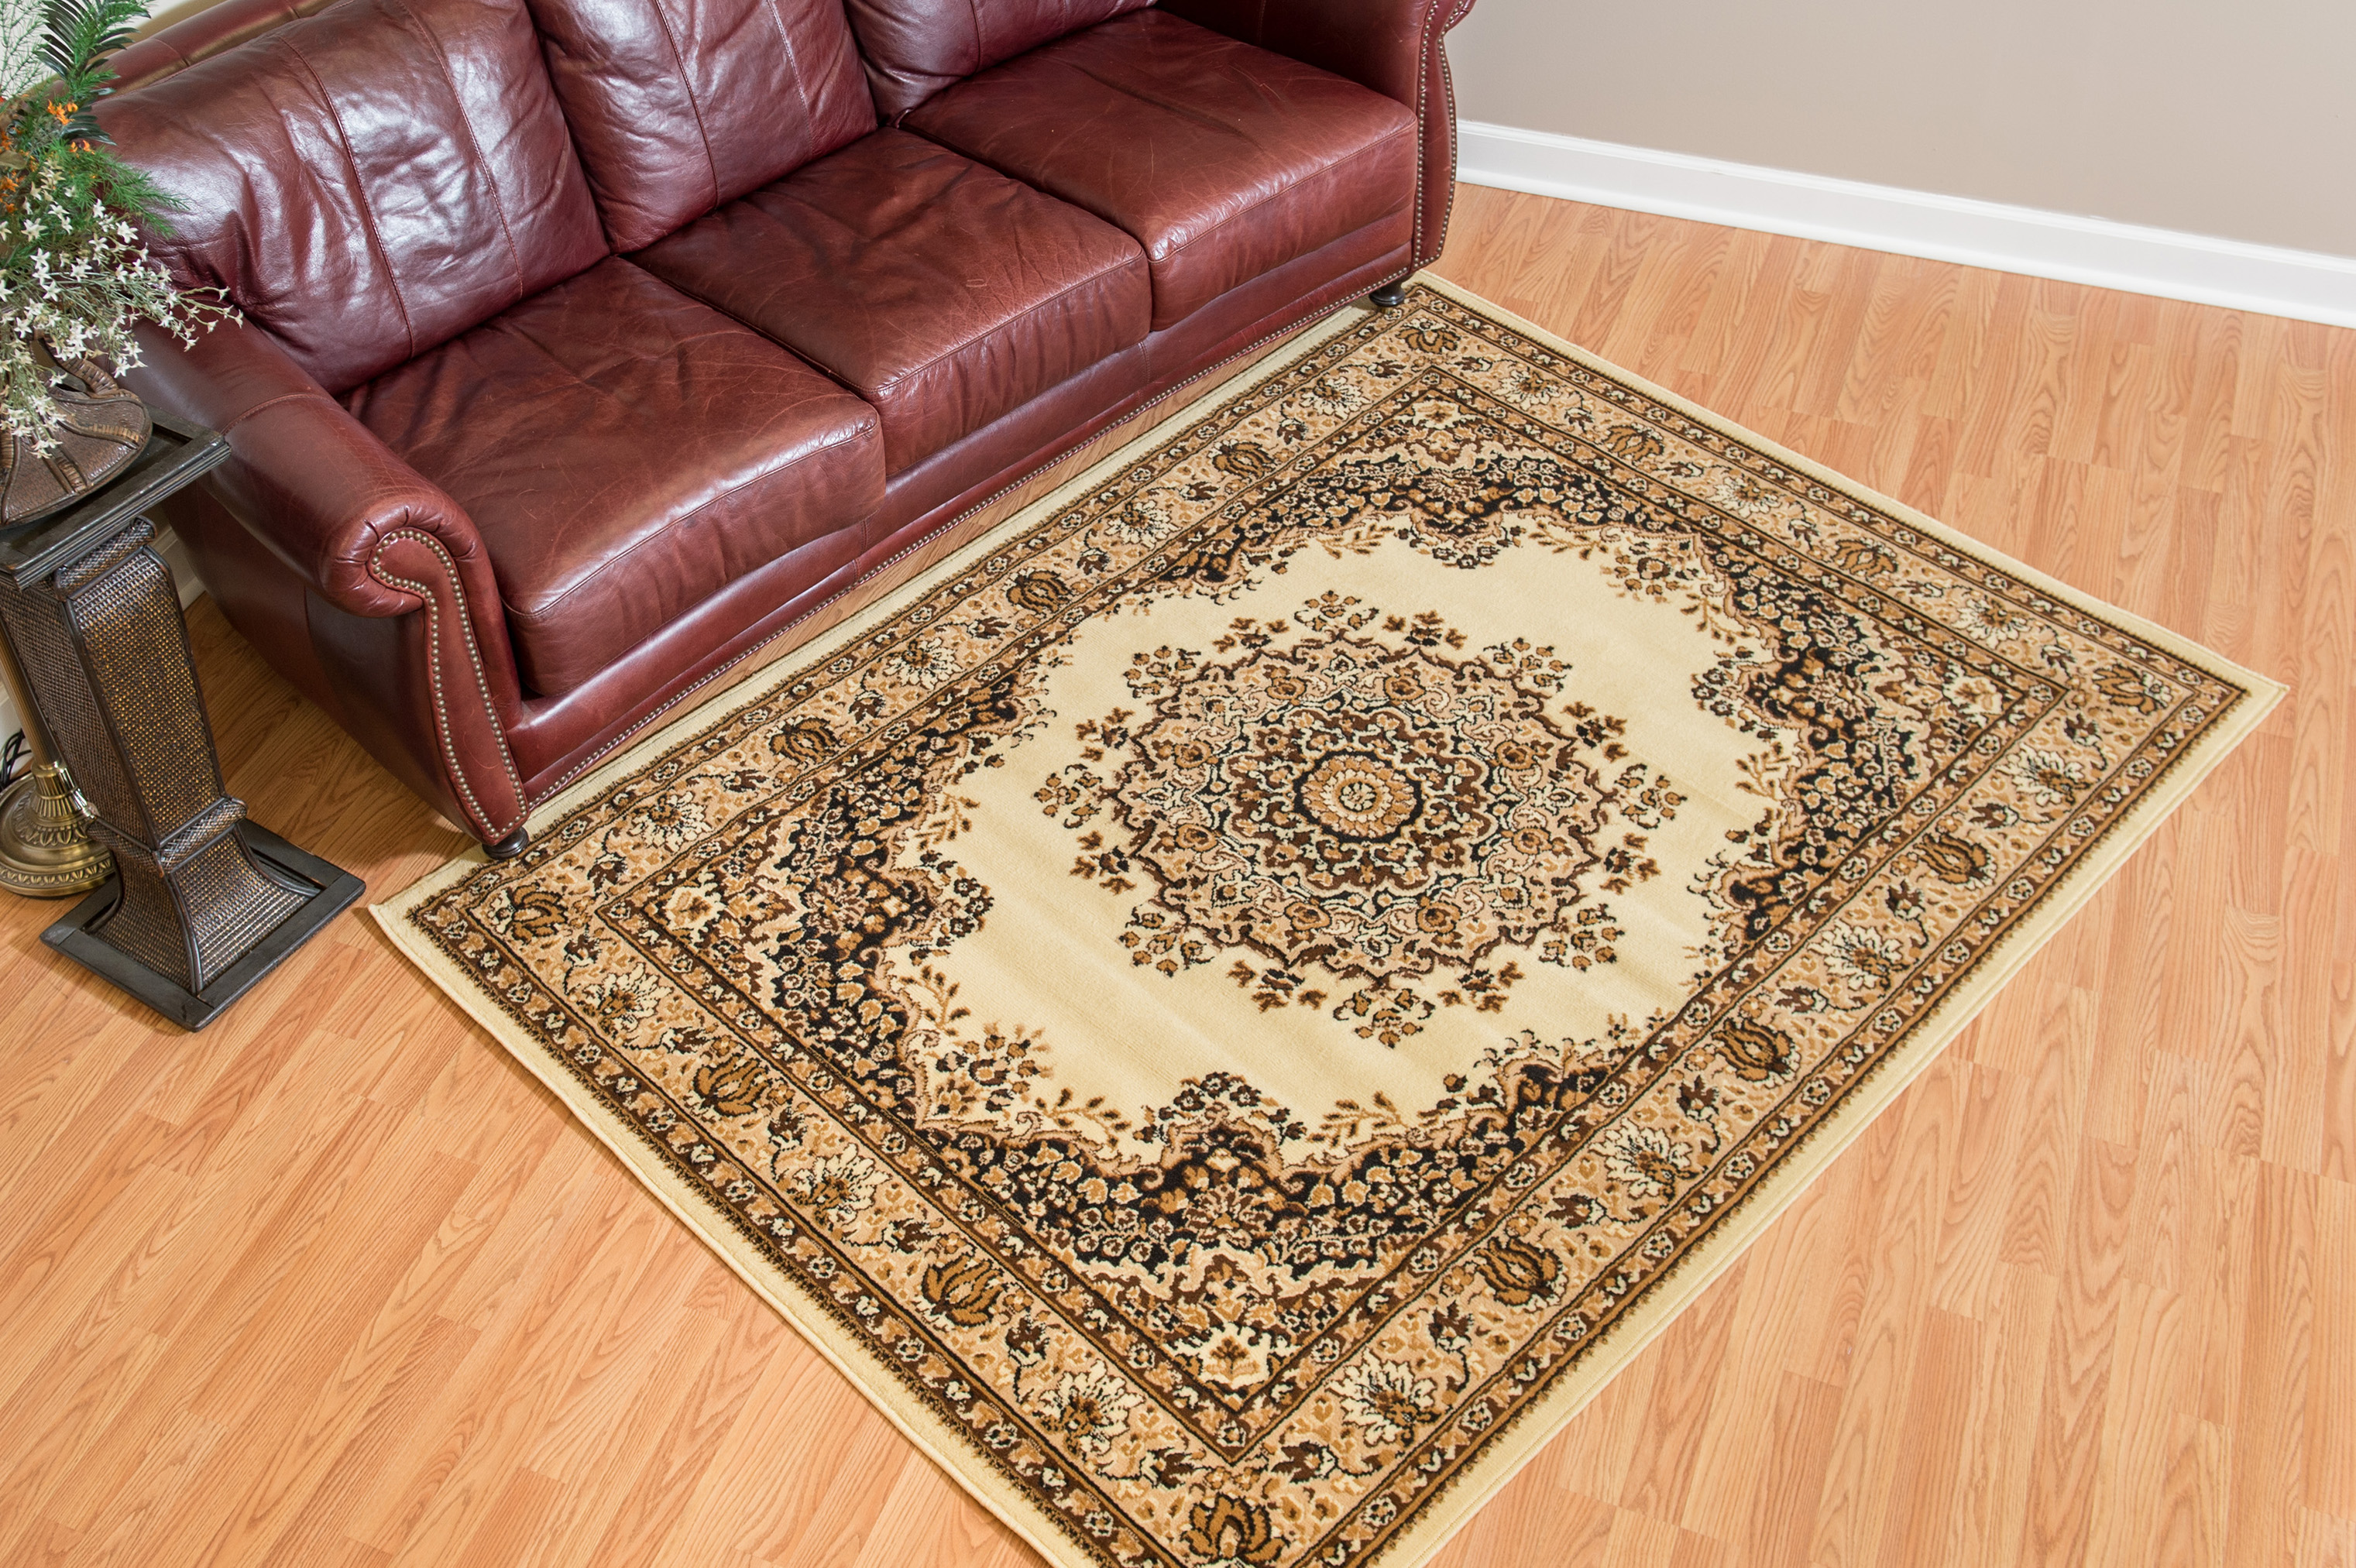 Designer Home Soft Traditional Oriental Area Rug with Center Medallion - Actual Size: 5' 3" x 7' 2" Rectangle (Ivory) - image 1 of 5